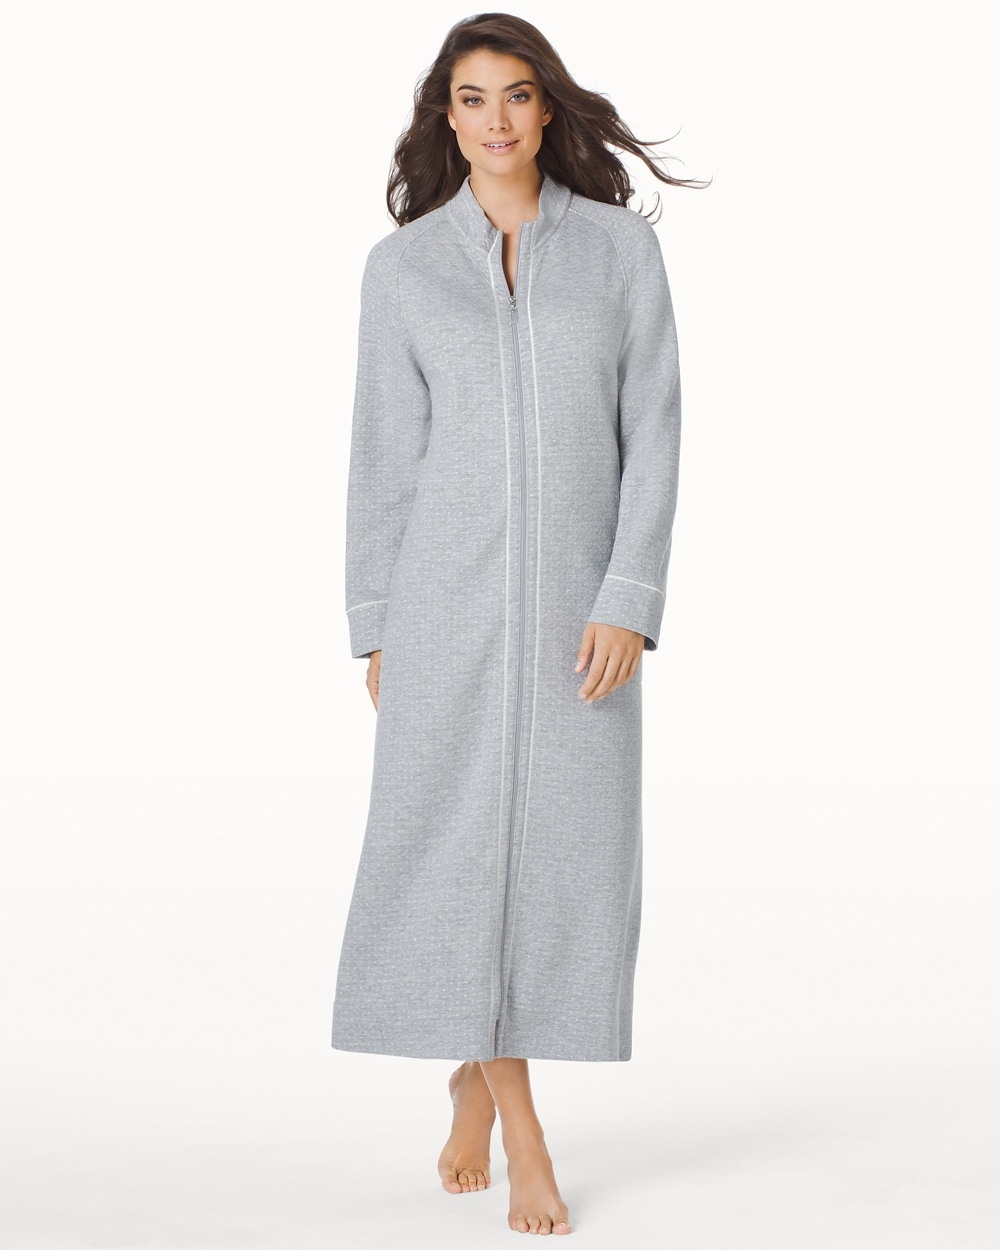 Carole Hochman 1X-3X Quilted Long Zip Robe Grey Heather - Soma